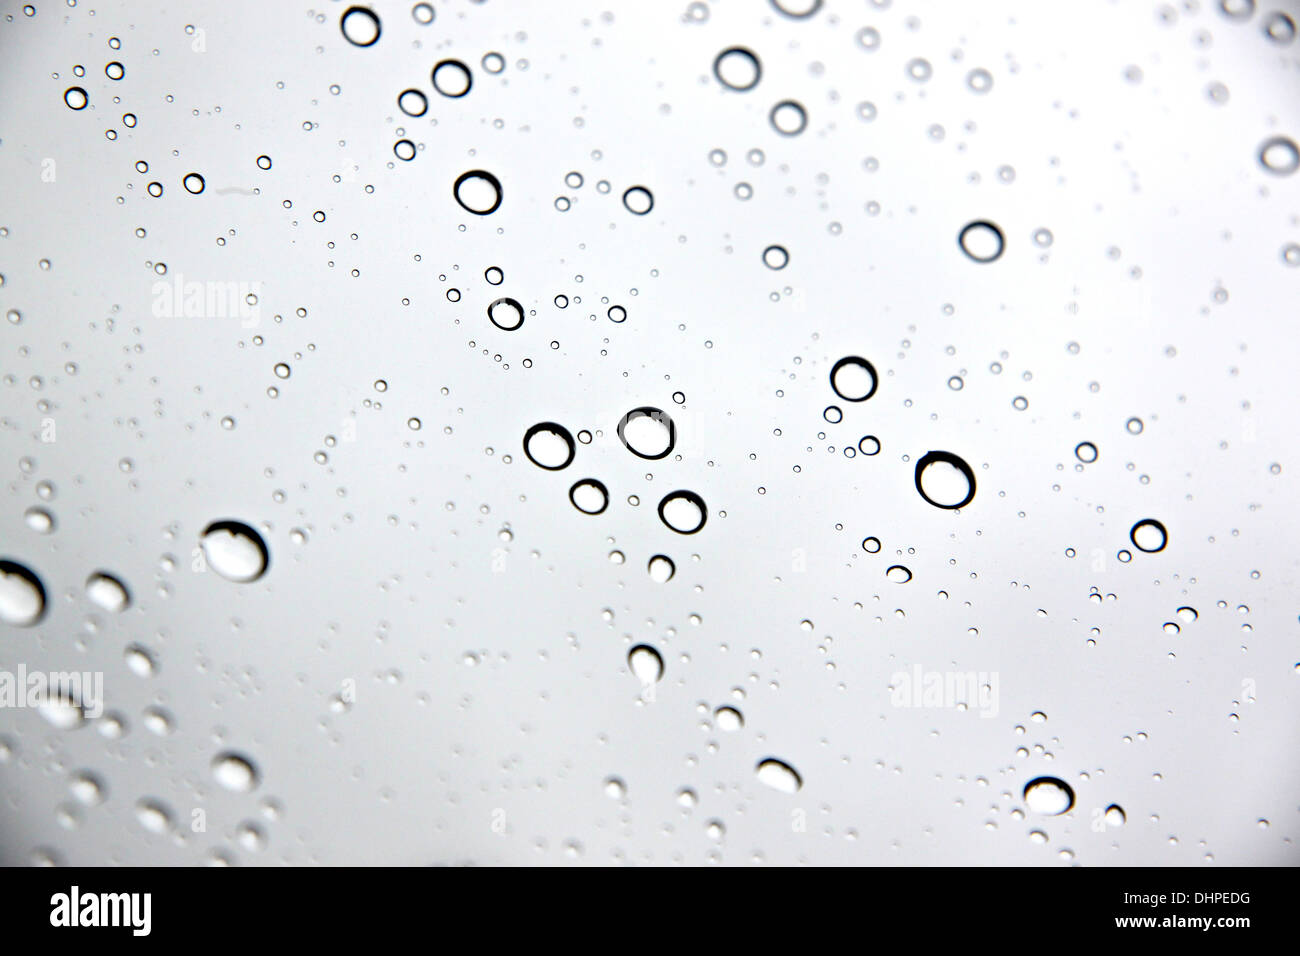 The Picture background Water droplets on Windshield Car. Stock Photo